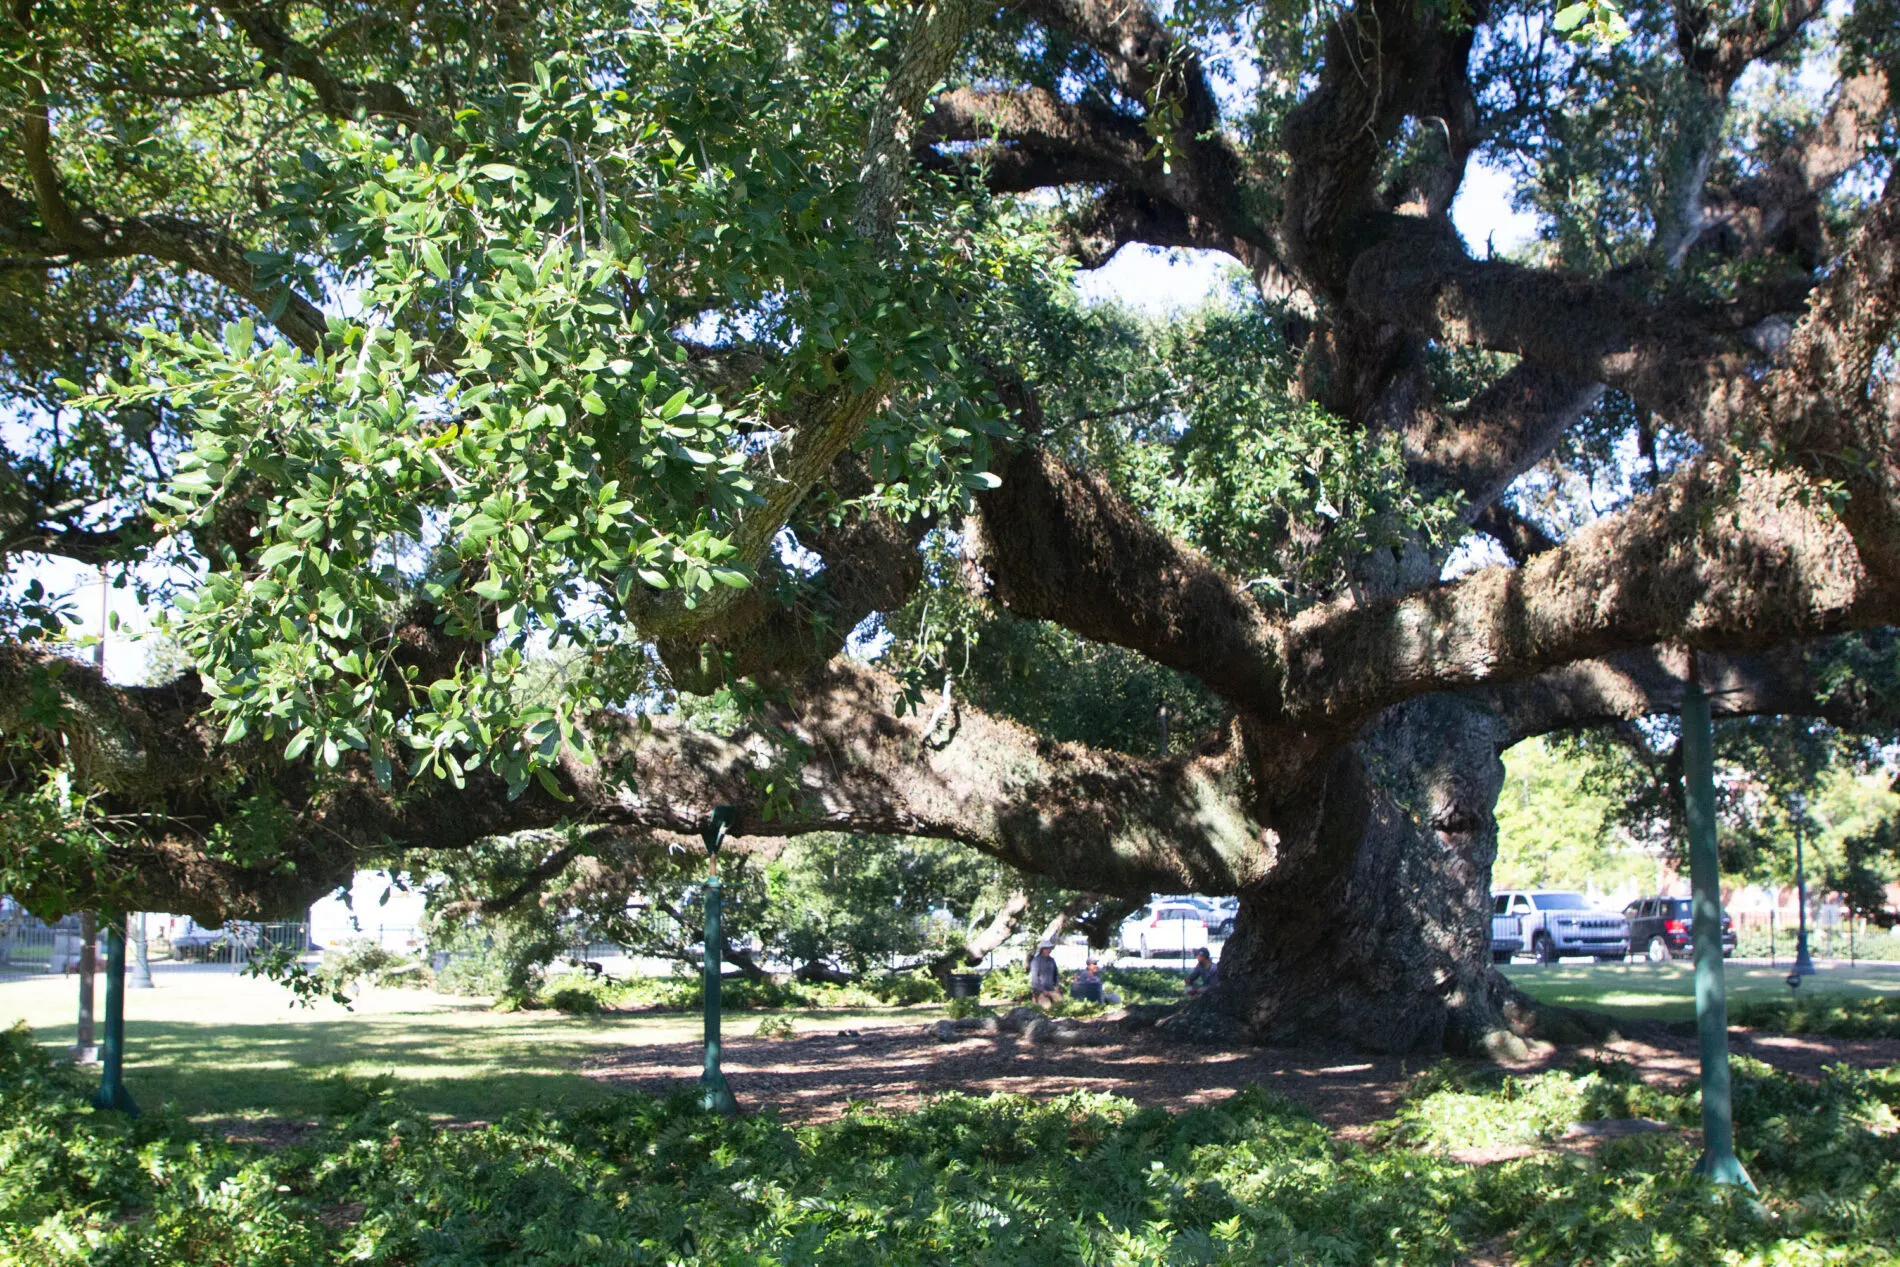 St. John's Cathedral 500 live oak; a must-see sight in Lafayette.